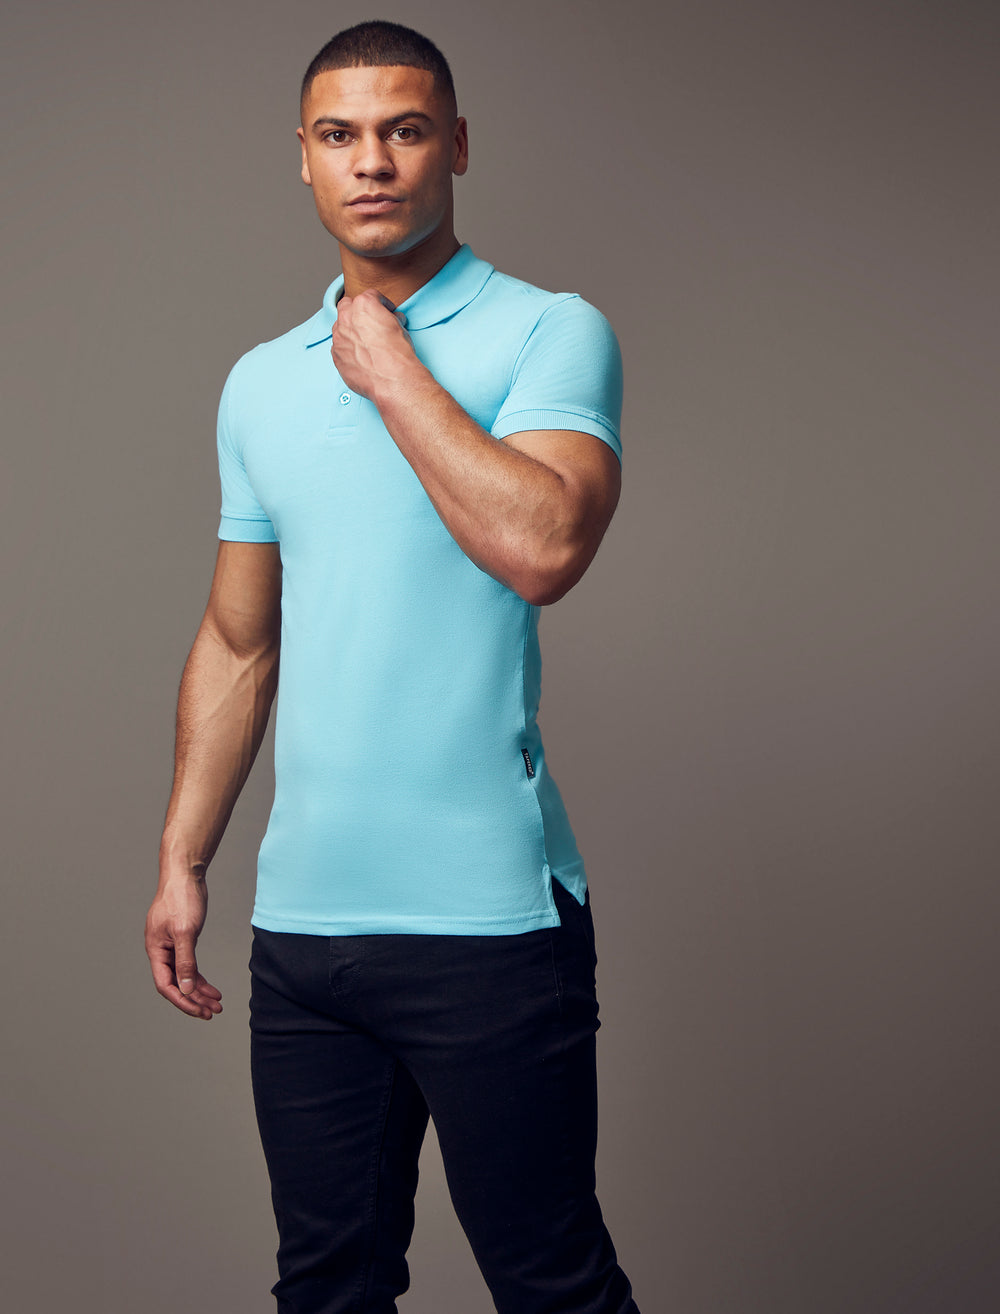 urquoise muscle fit short sleeve polo shirt, highlighting the tapered fit and premium quality offered by Tapered Menswear